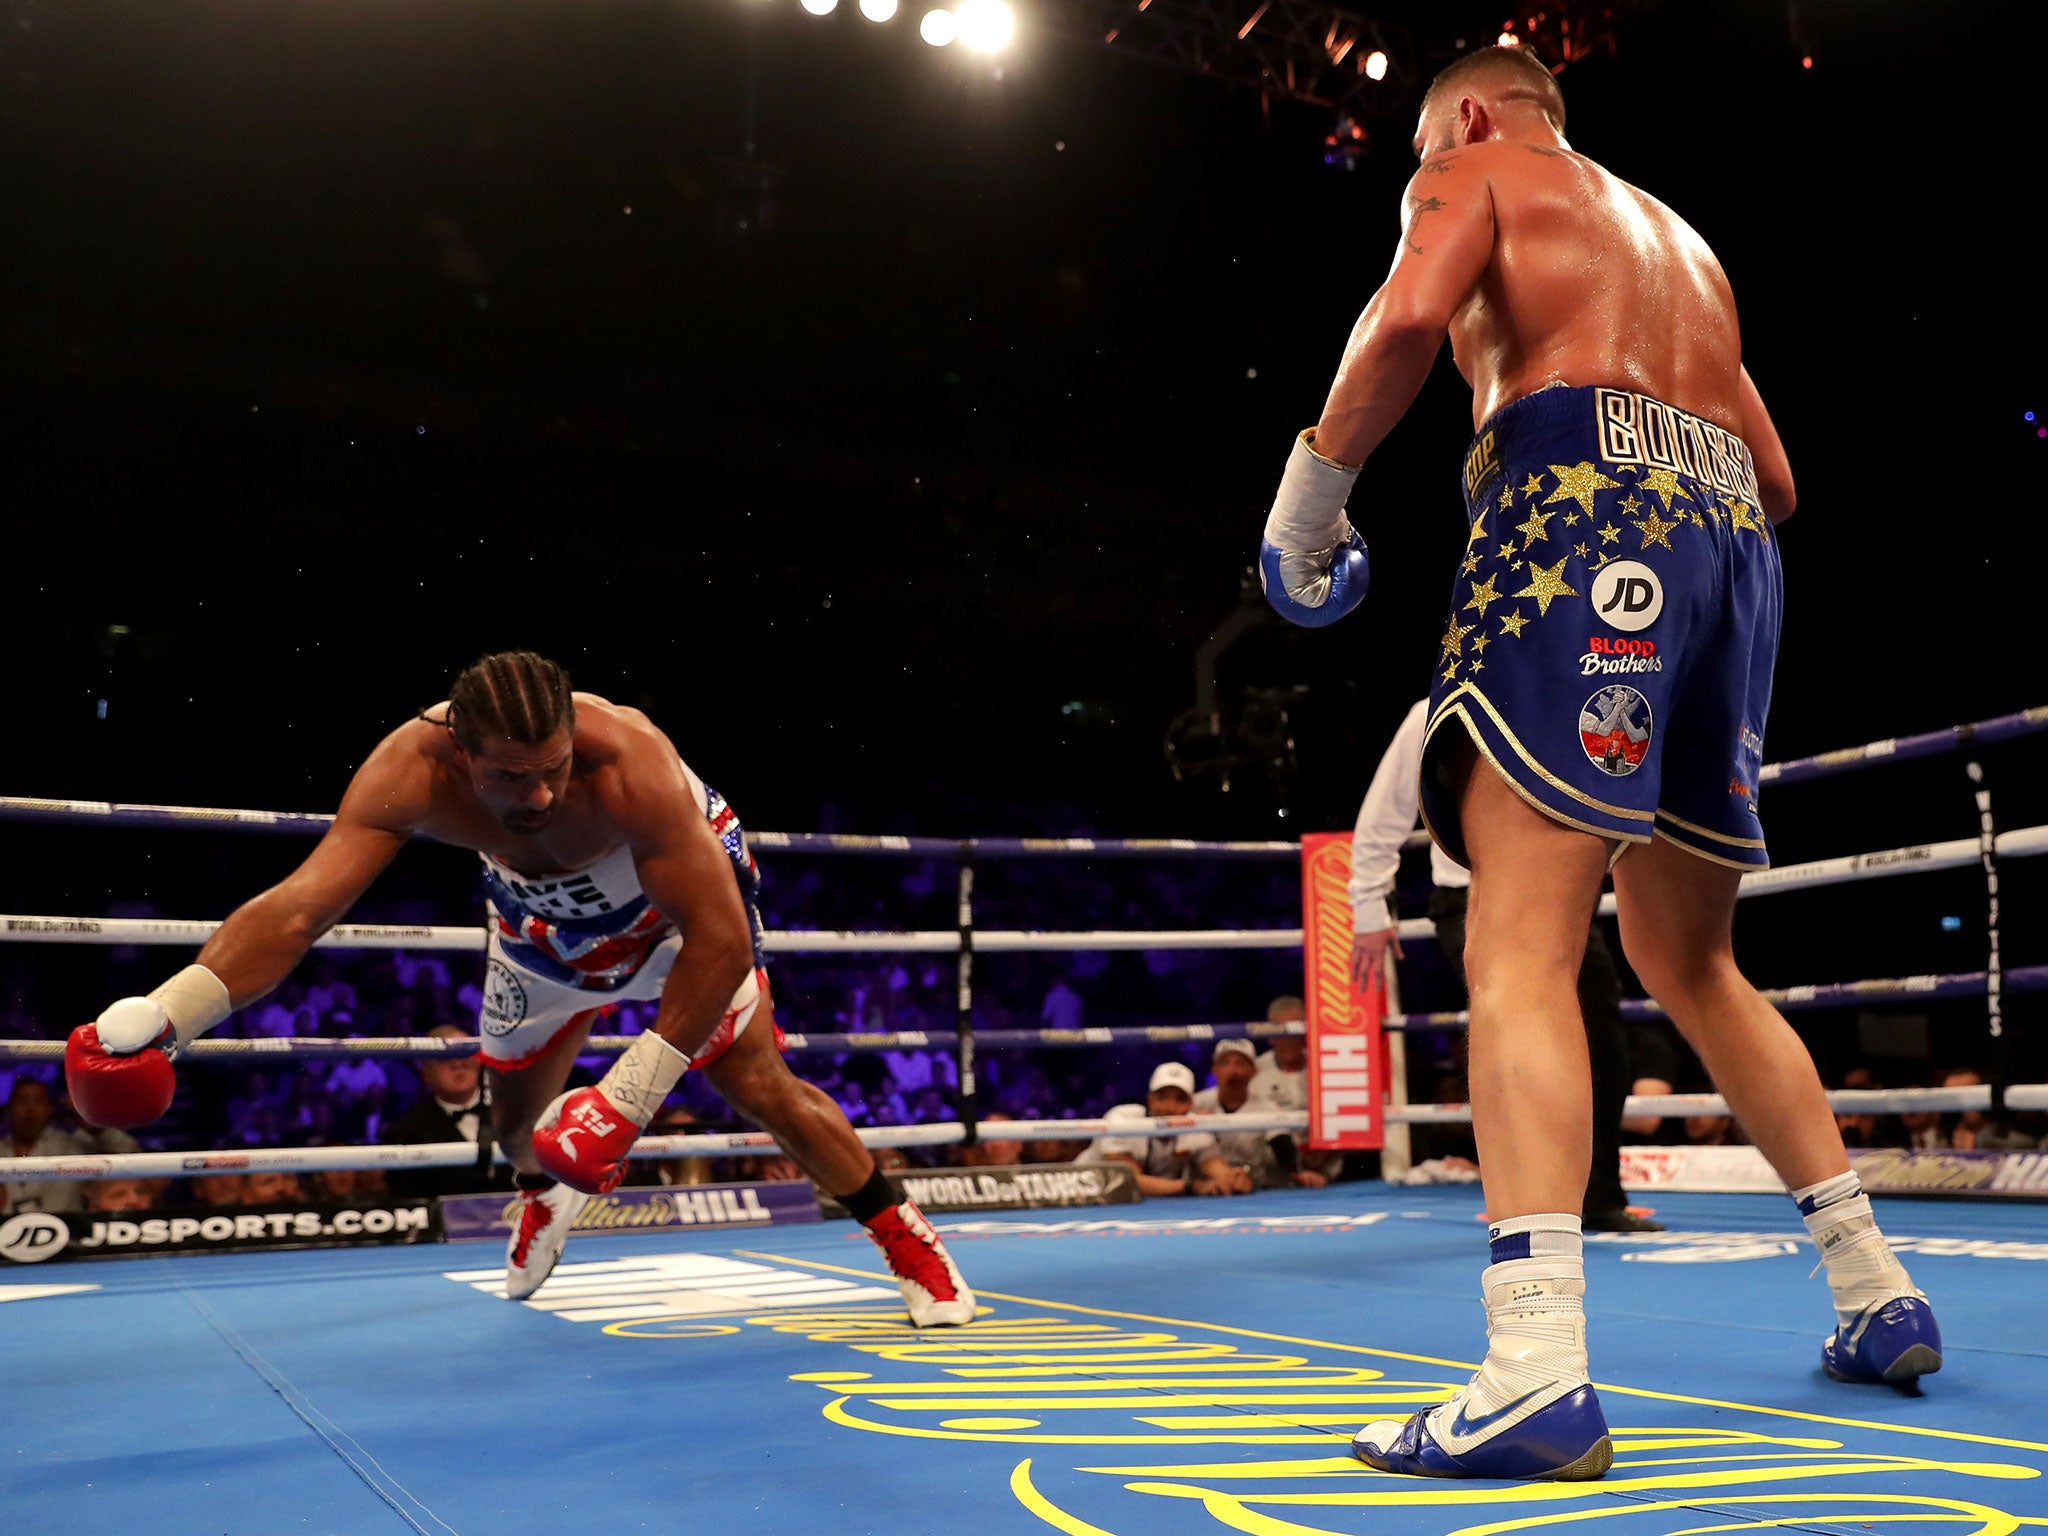 Bellew sent Haye to the canvas in the fifth